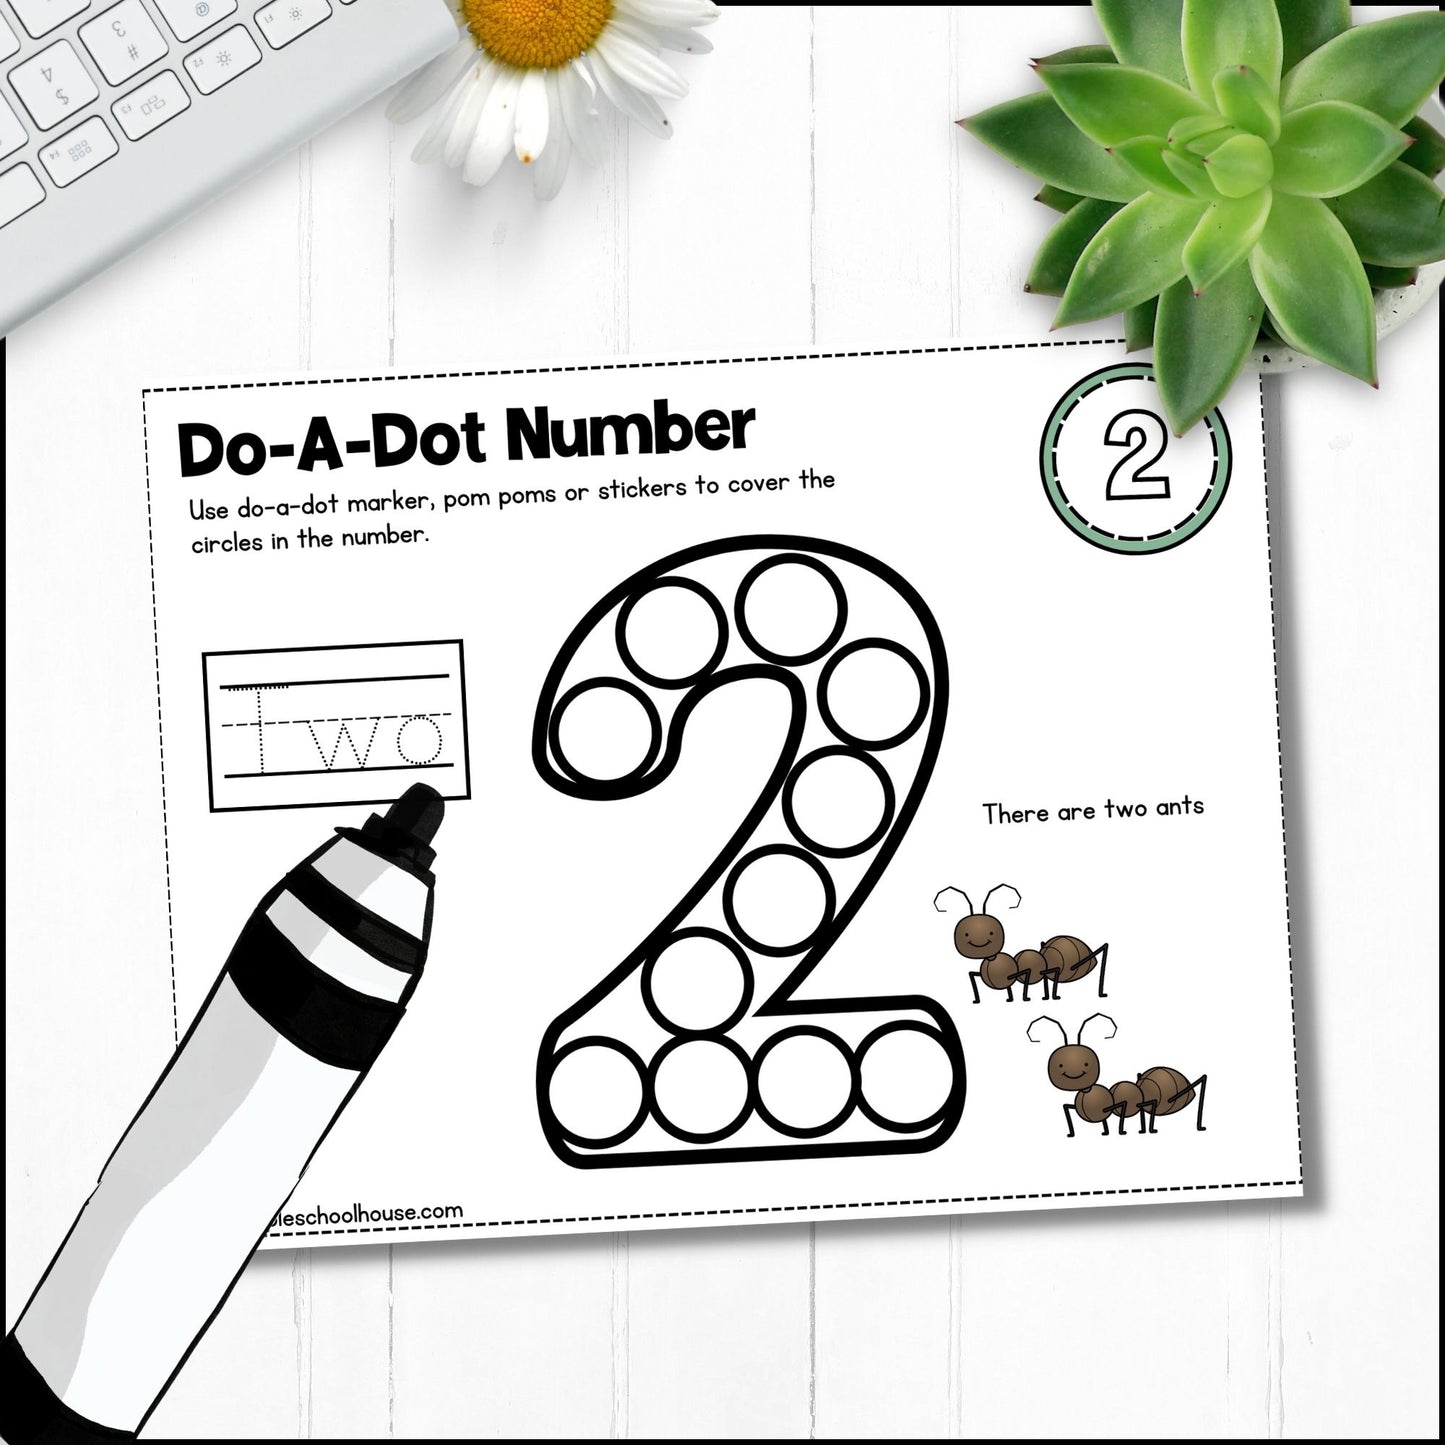 Do-A-Dot Numbers